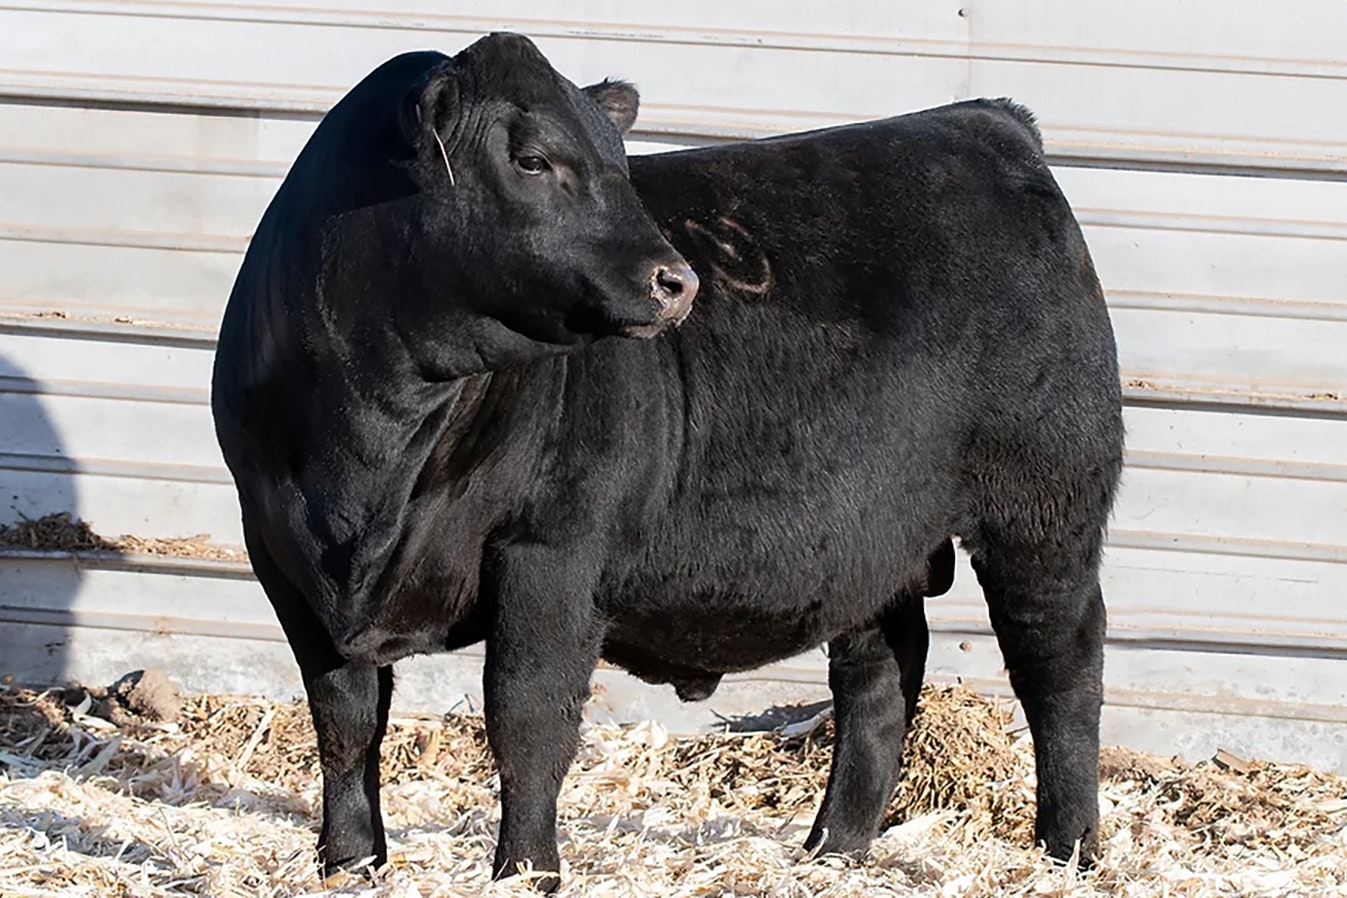 Doc Ryan is a Wyoming-born Angus bull that sold for more than $500,000, and is so sought after that a rancher has shelled out $140,000 for one of his unborn calves.